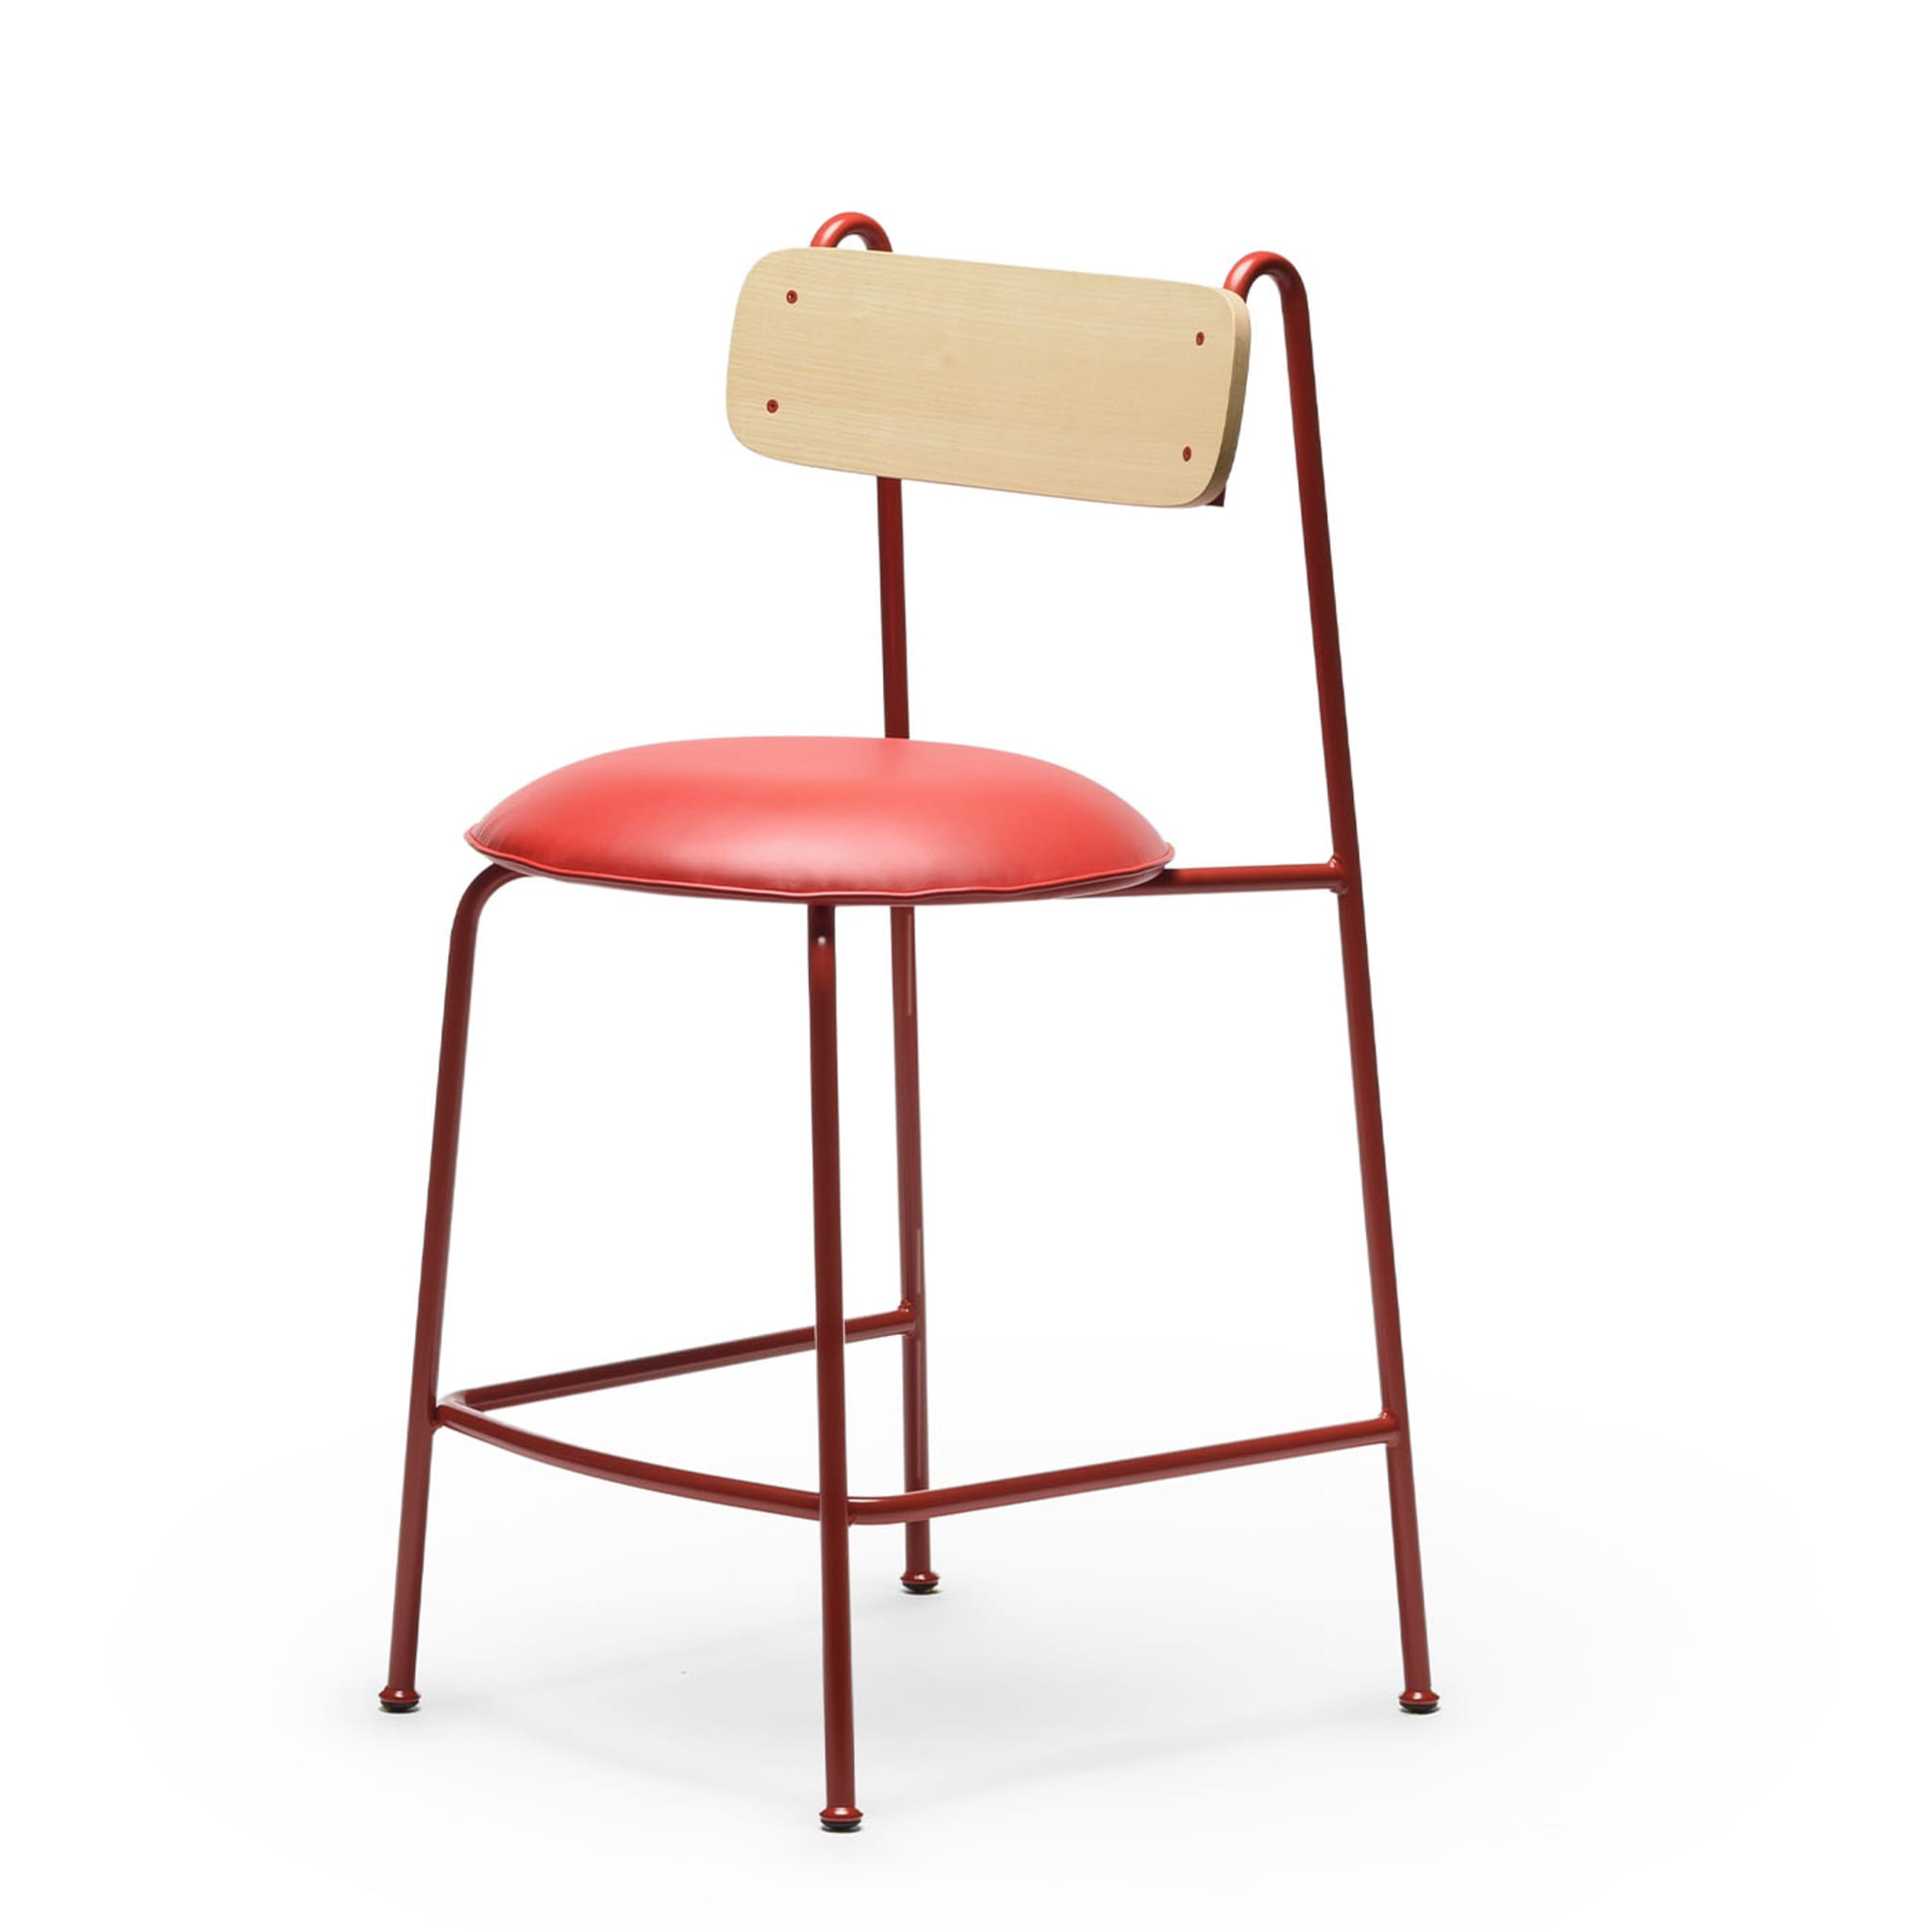 Lena Sg-65 Red And Natural Ash Bar Stool By Designerd - Alternative view 4